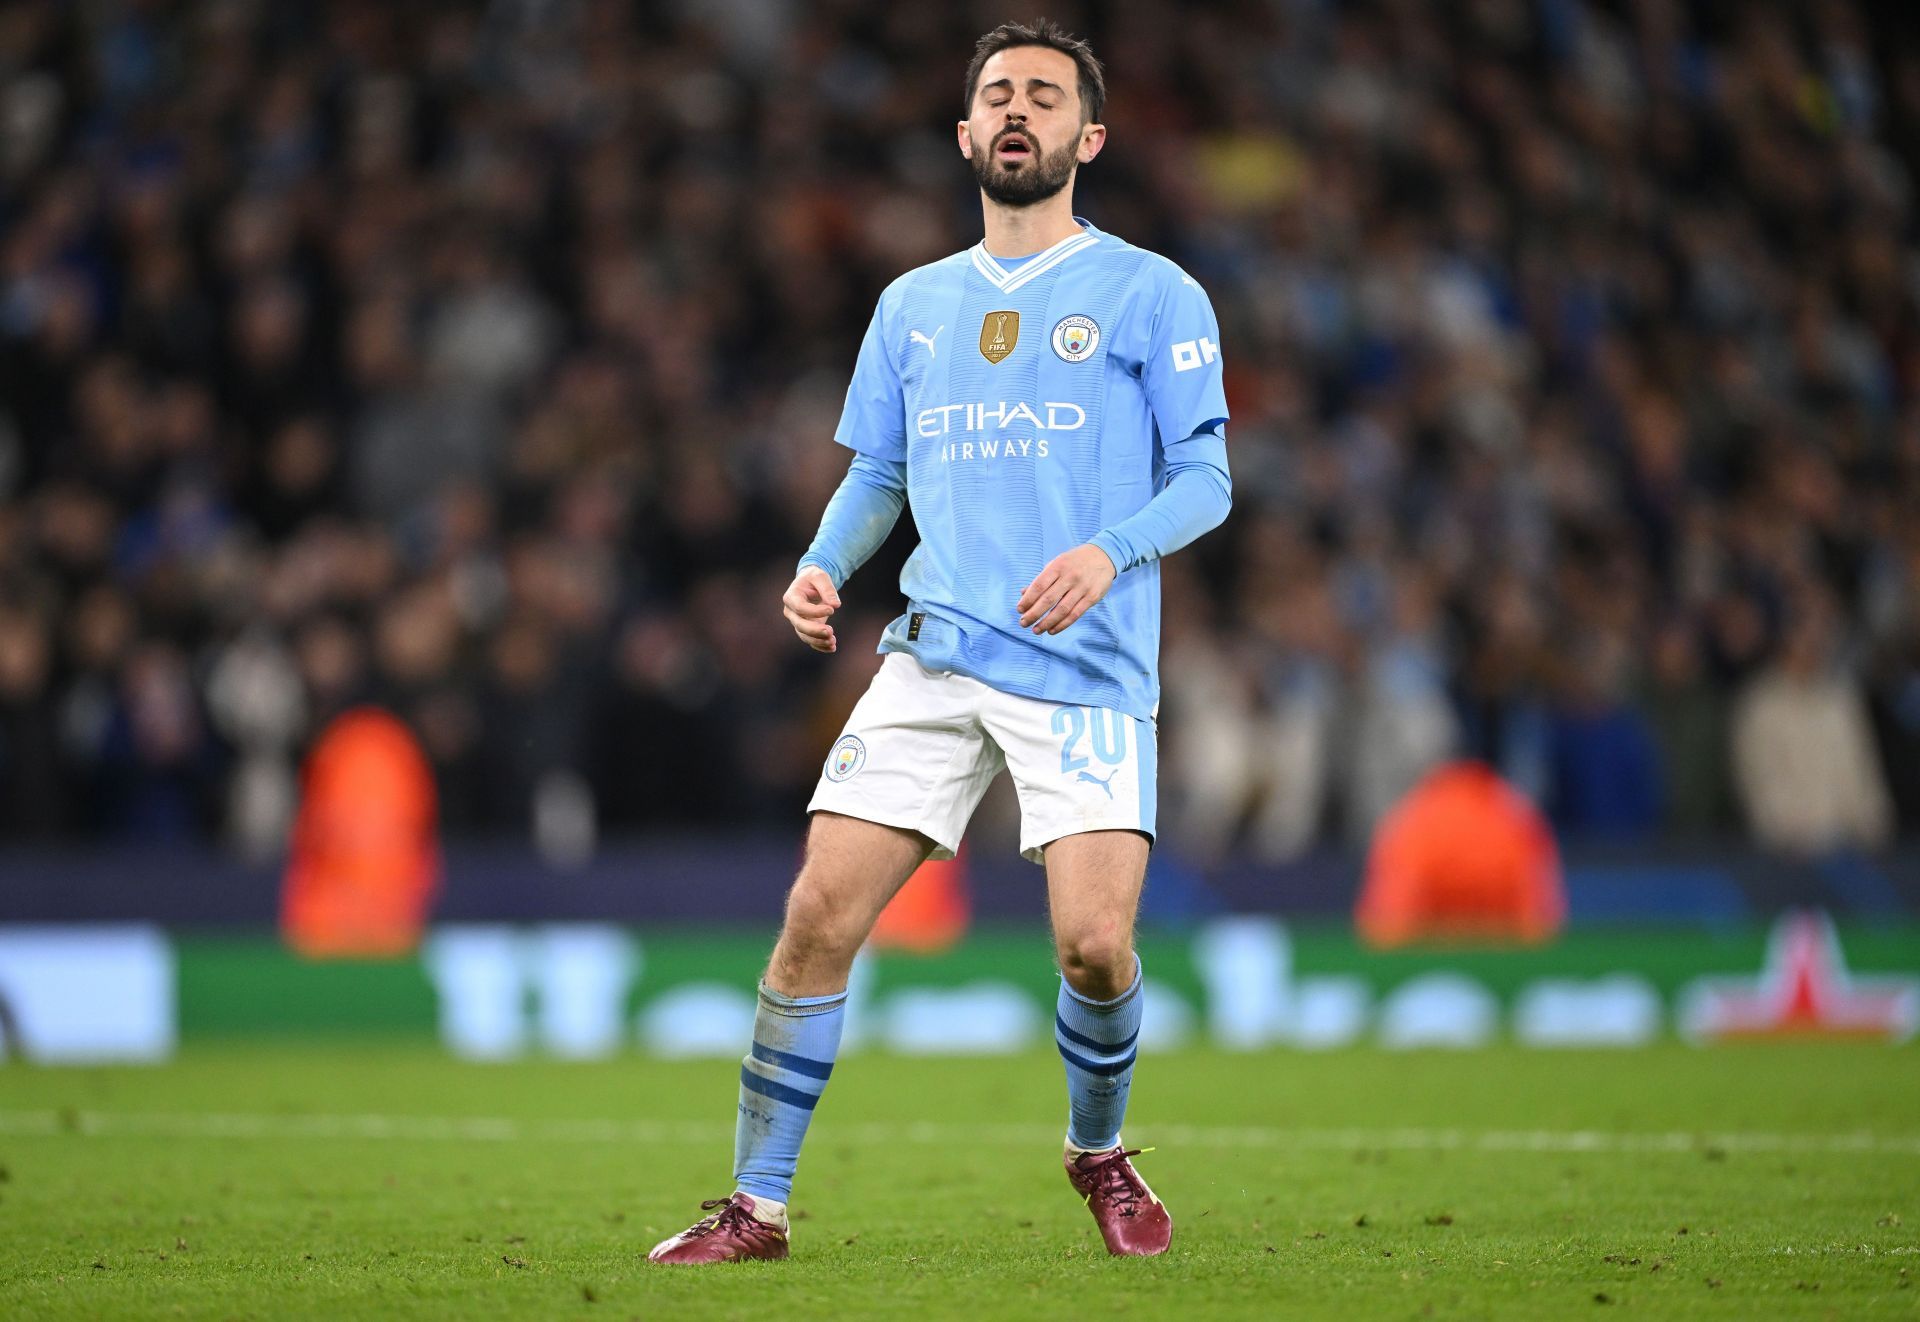 Bernardo Silva is unlikely to move to the Emirates